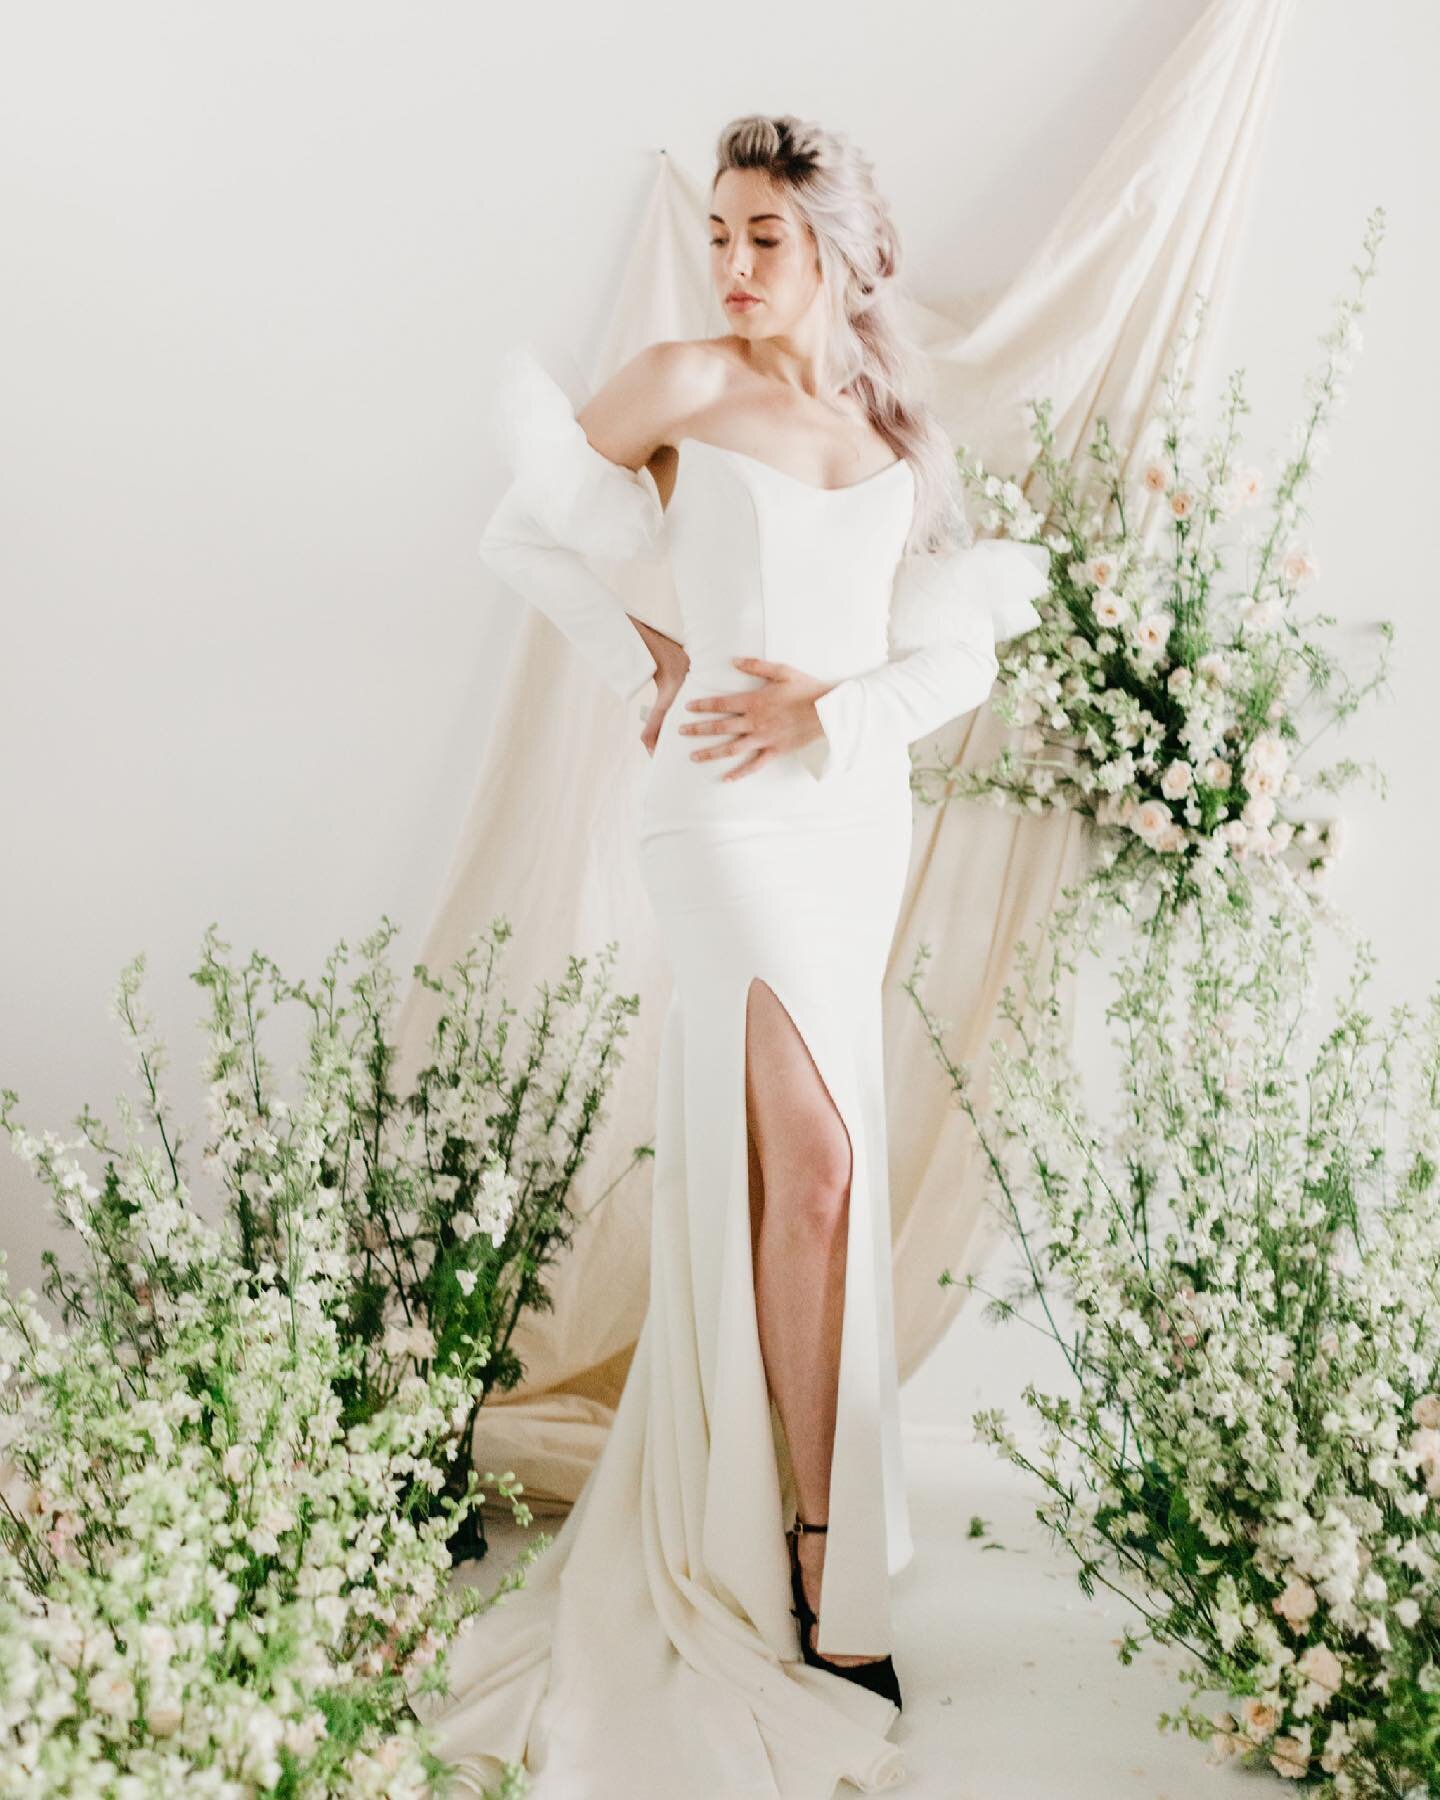 styled shoots keep us creative ✨ dreaming of something and need florals? Send us some photos of your inspiration or ask what we&rsquo;re dying to create 🌿 

📷 by @christinakarst